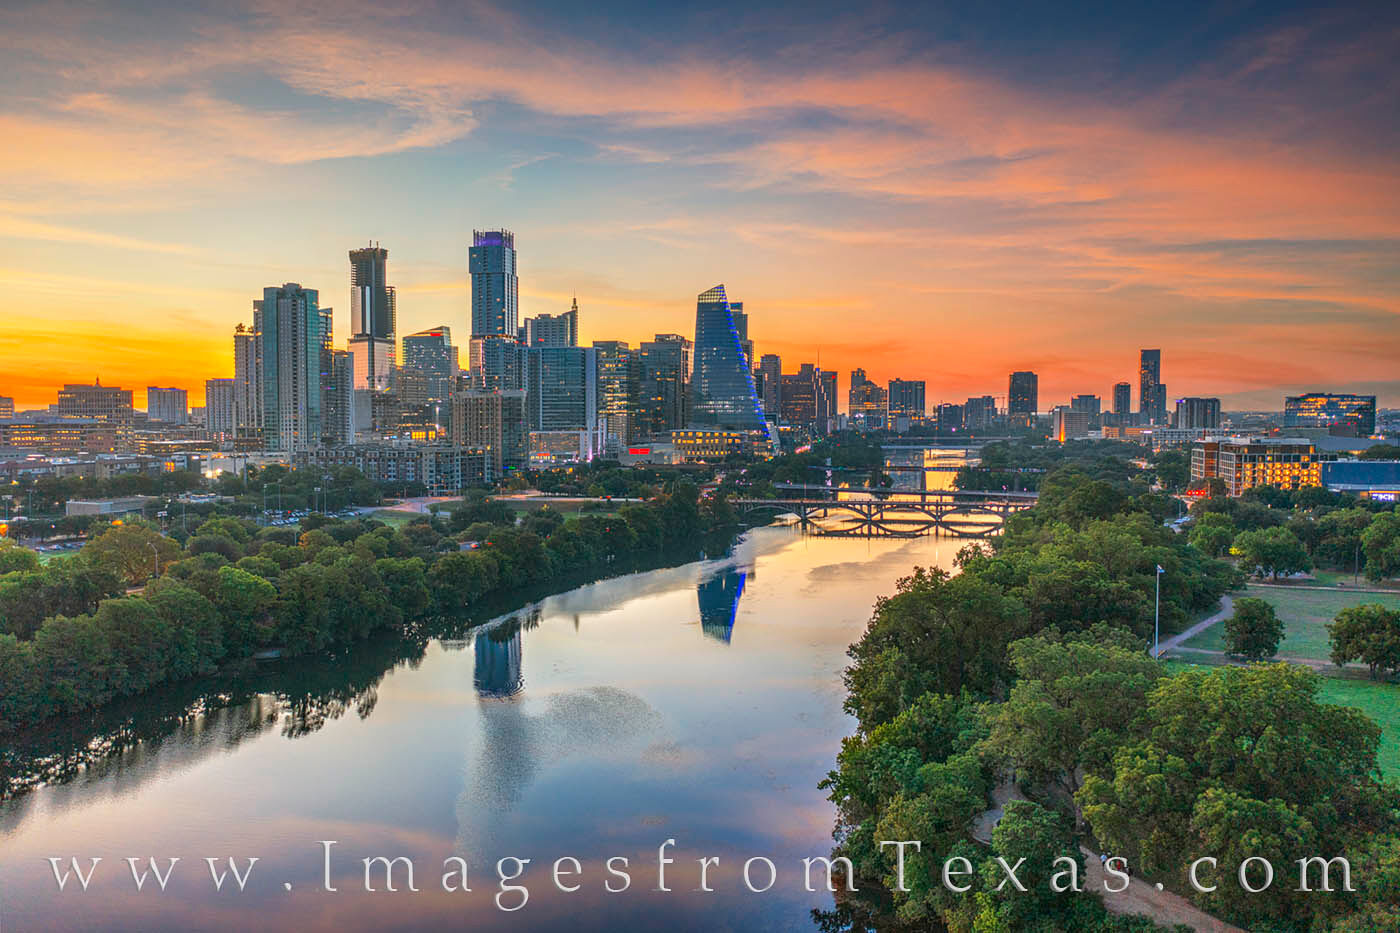 From high above the trees along the Zilker Park Hike & Bike Trail, the Austin skyline rises into a beautiful morning sky of pastels...